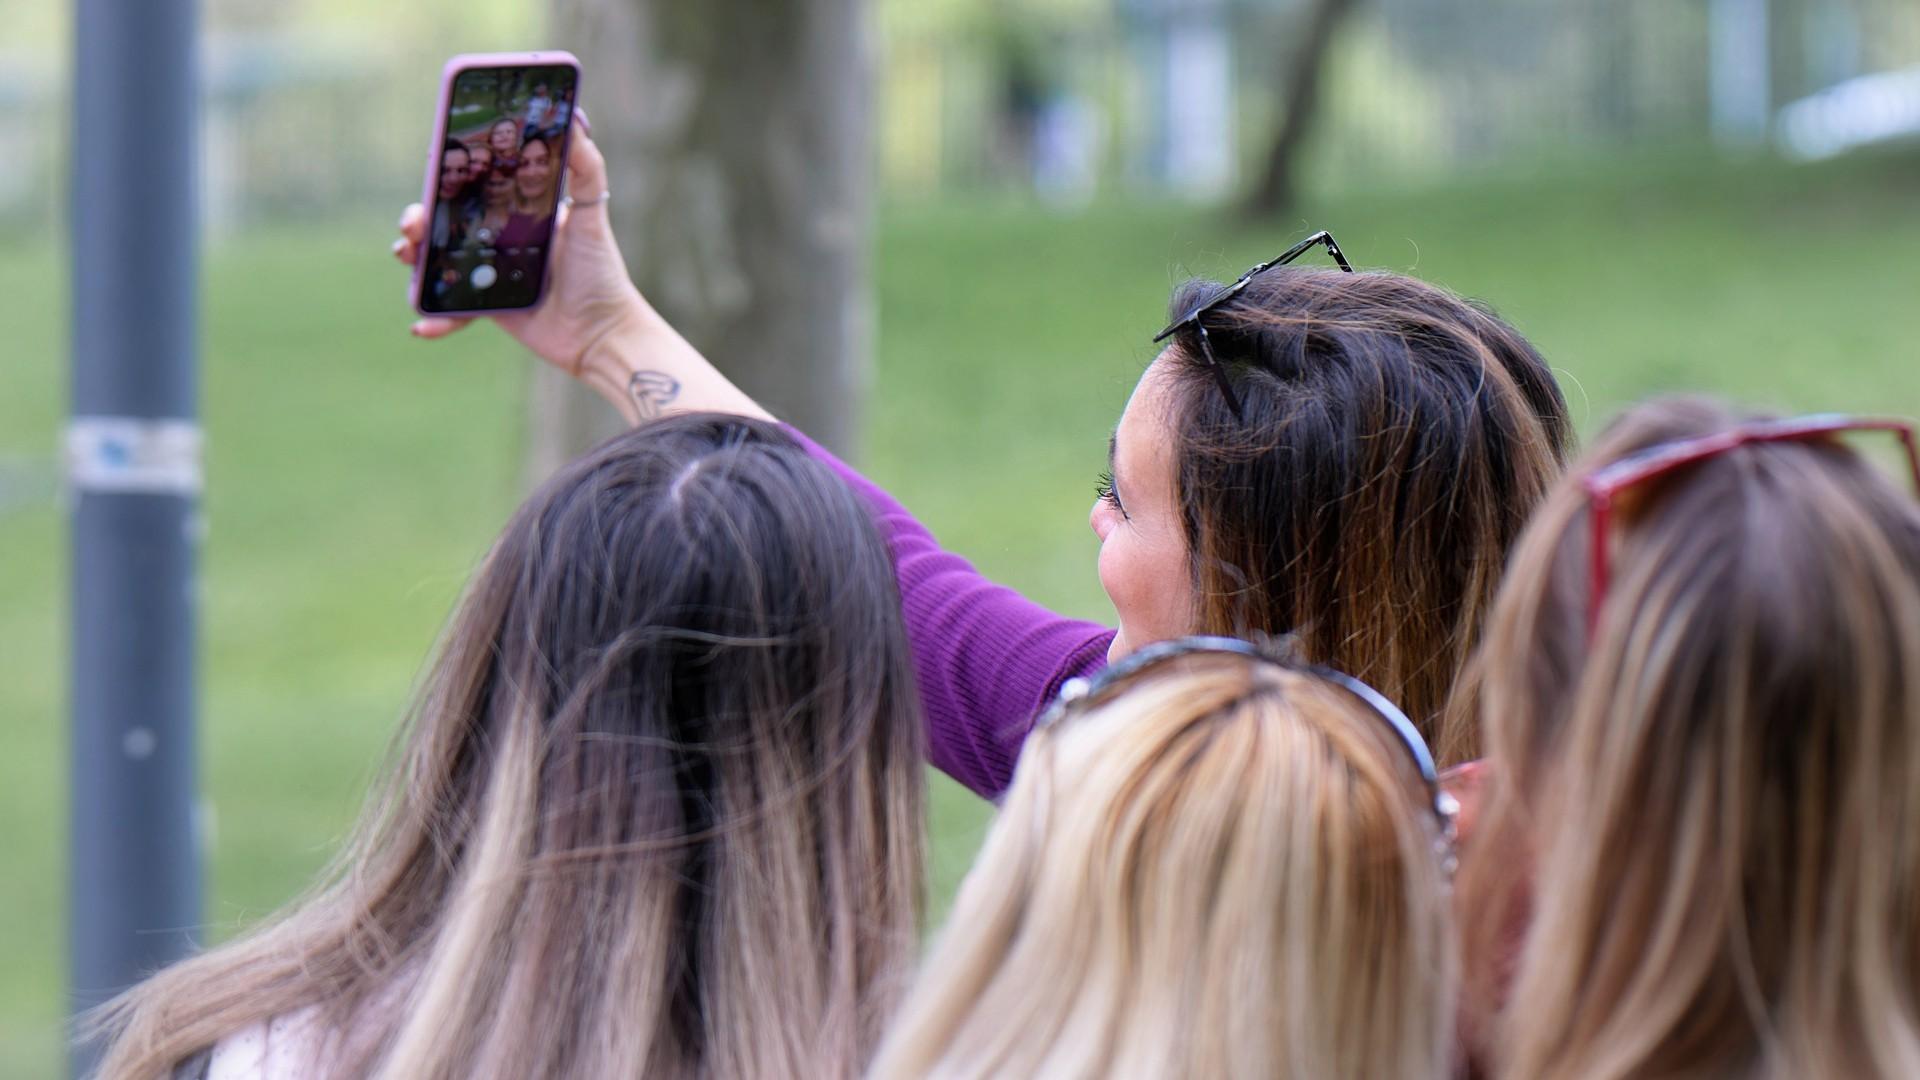 A group of women trying to capture a selfie on a smartphone